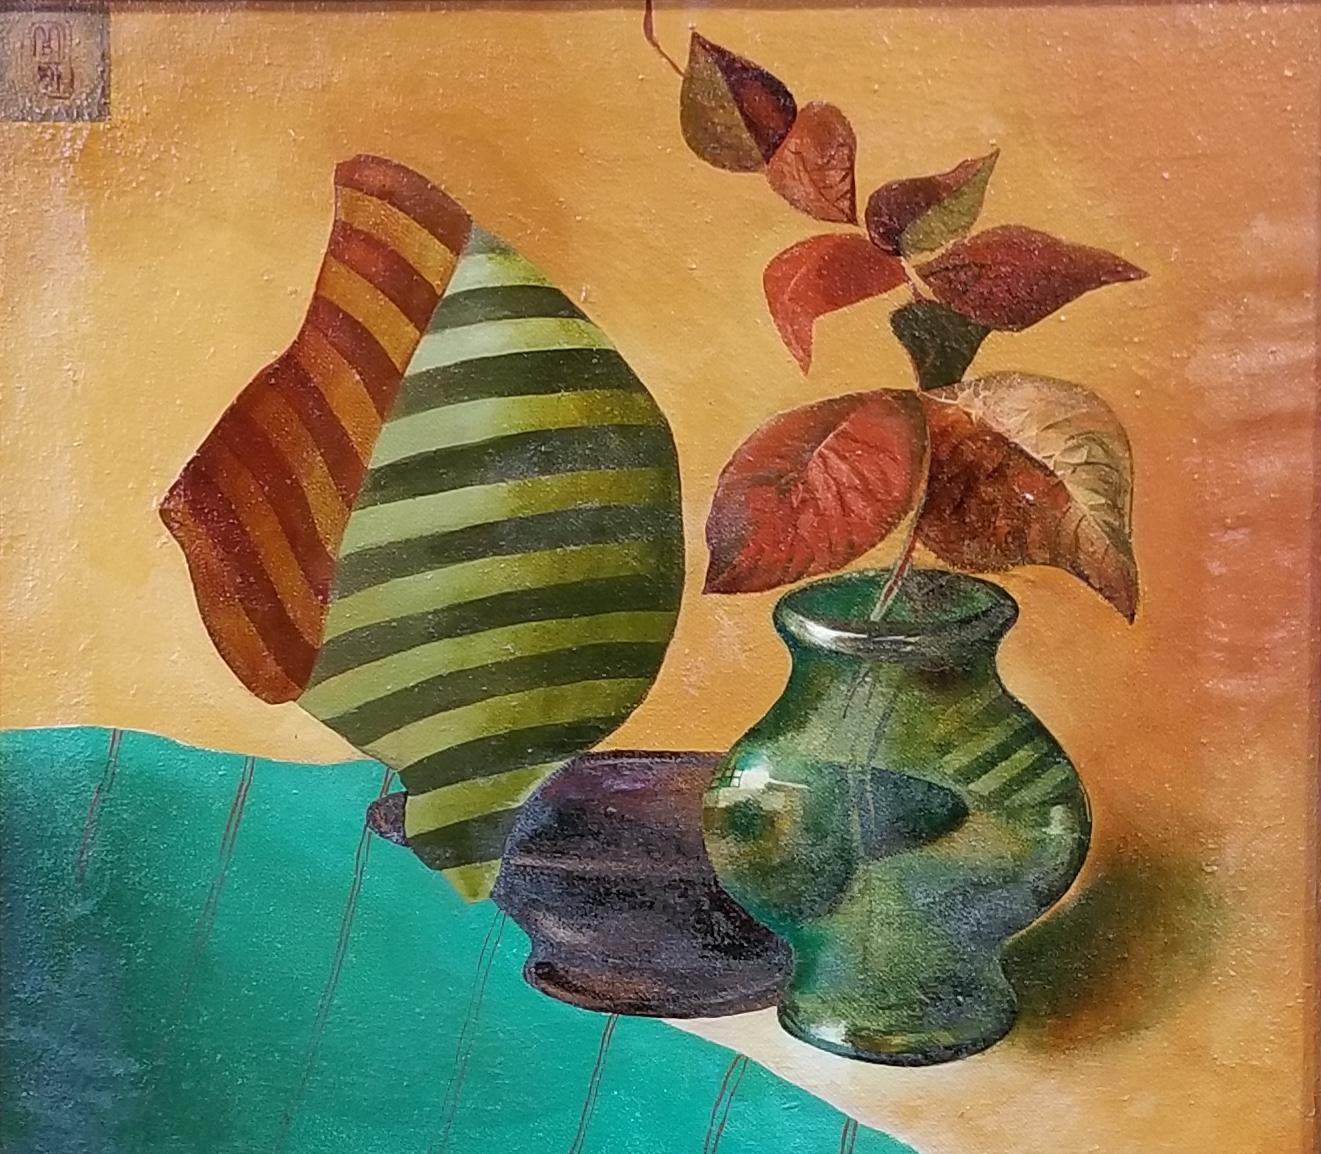 Fine surreal still life painting by Manya Vaptsarova in original frame, late 20th century. Canvas only measures 14.13 inches by 16 inches.

Manya Vaptsarova

Education
1986 Finished the Academy of Fine Arts in
 Sofia, Bulgaria with Diploma of